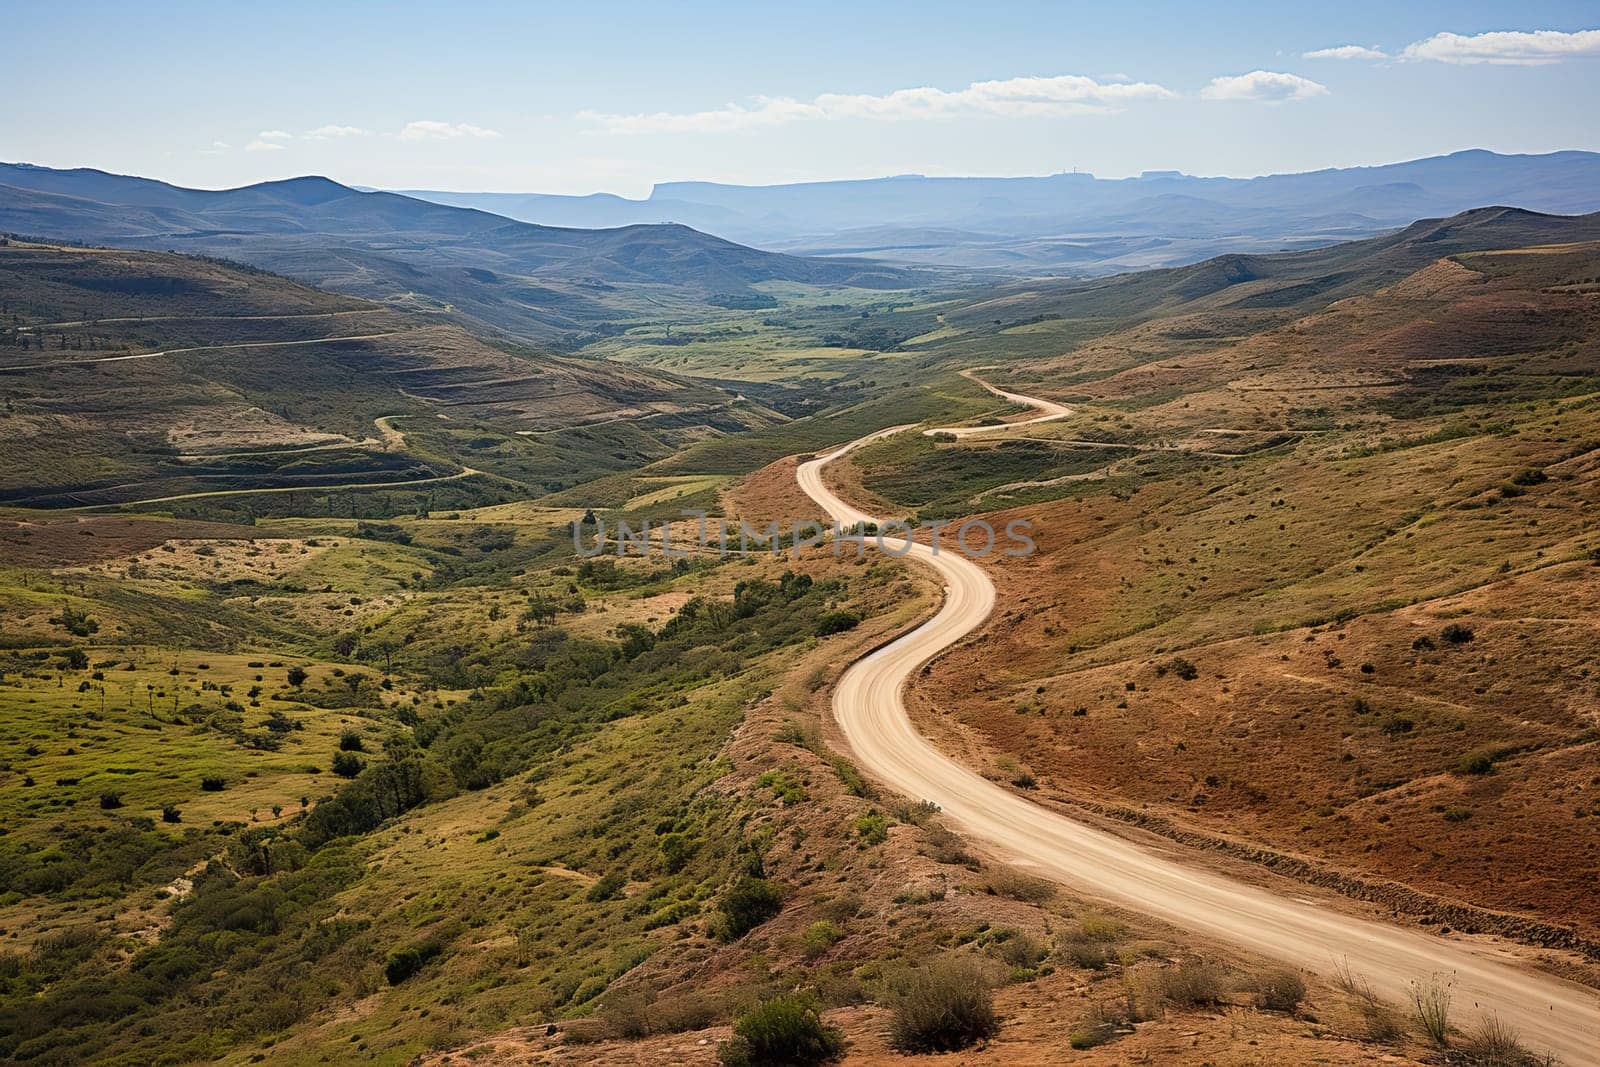 a dirt road in the middle of an open area with hills and mountains on either side, as seen from above